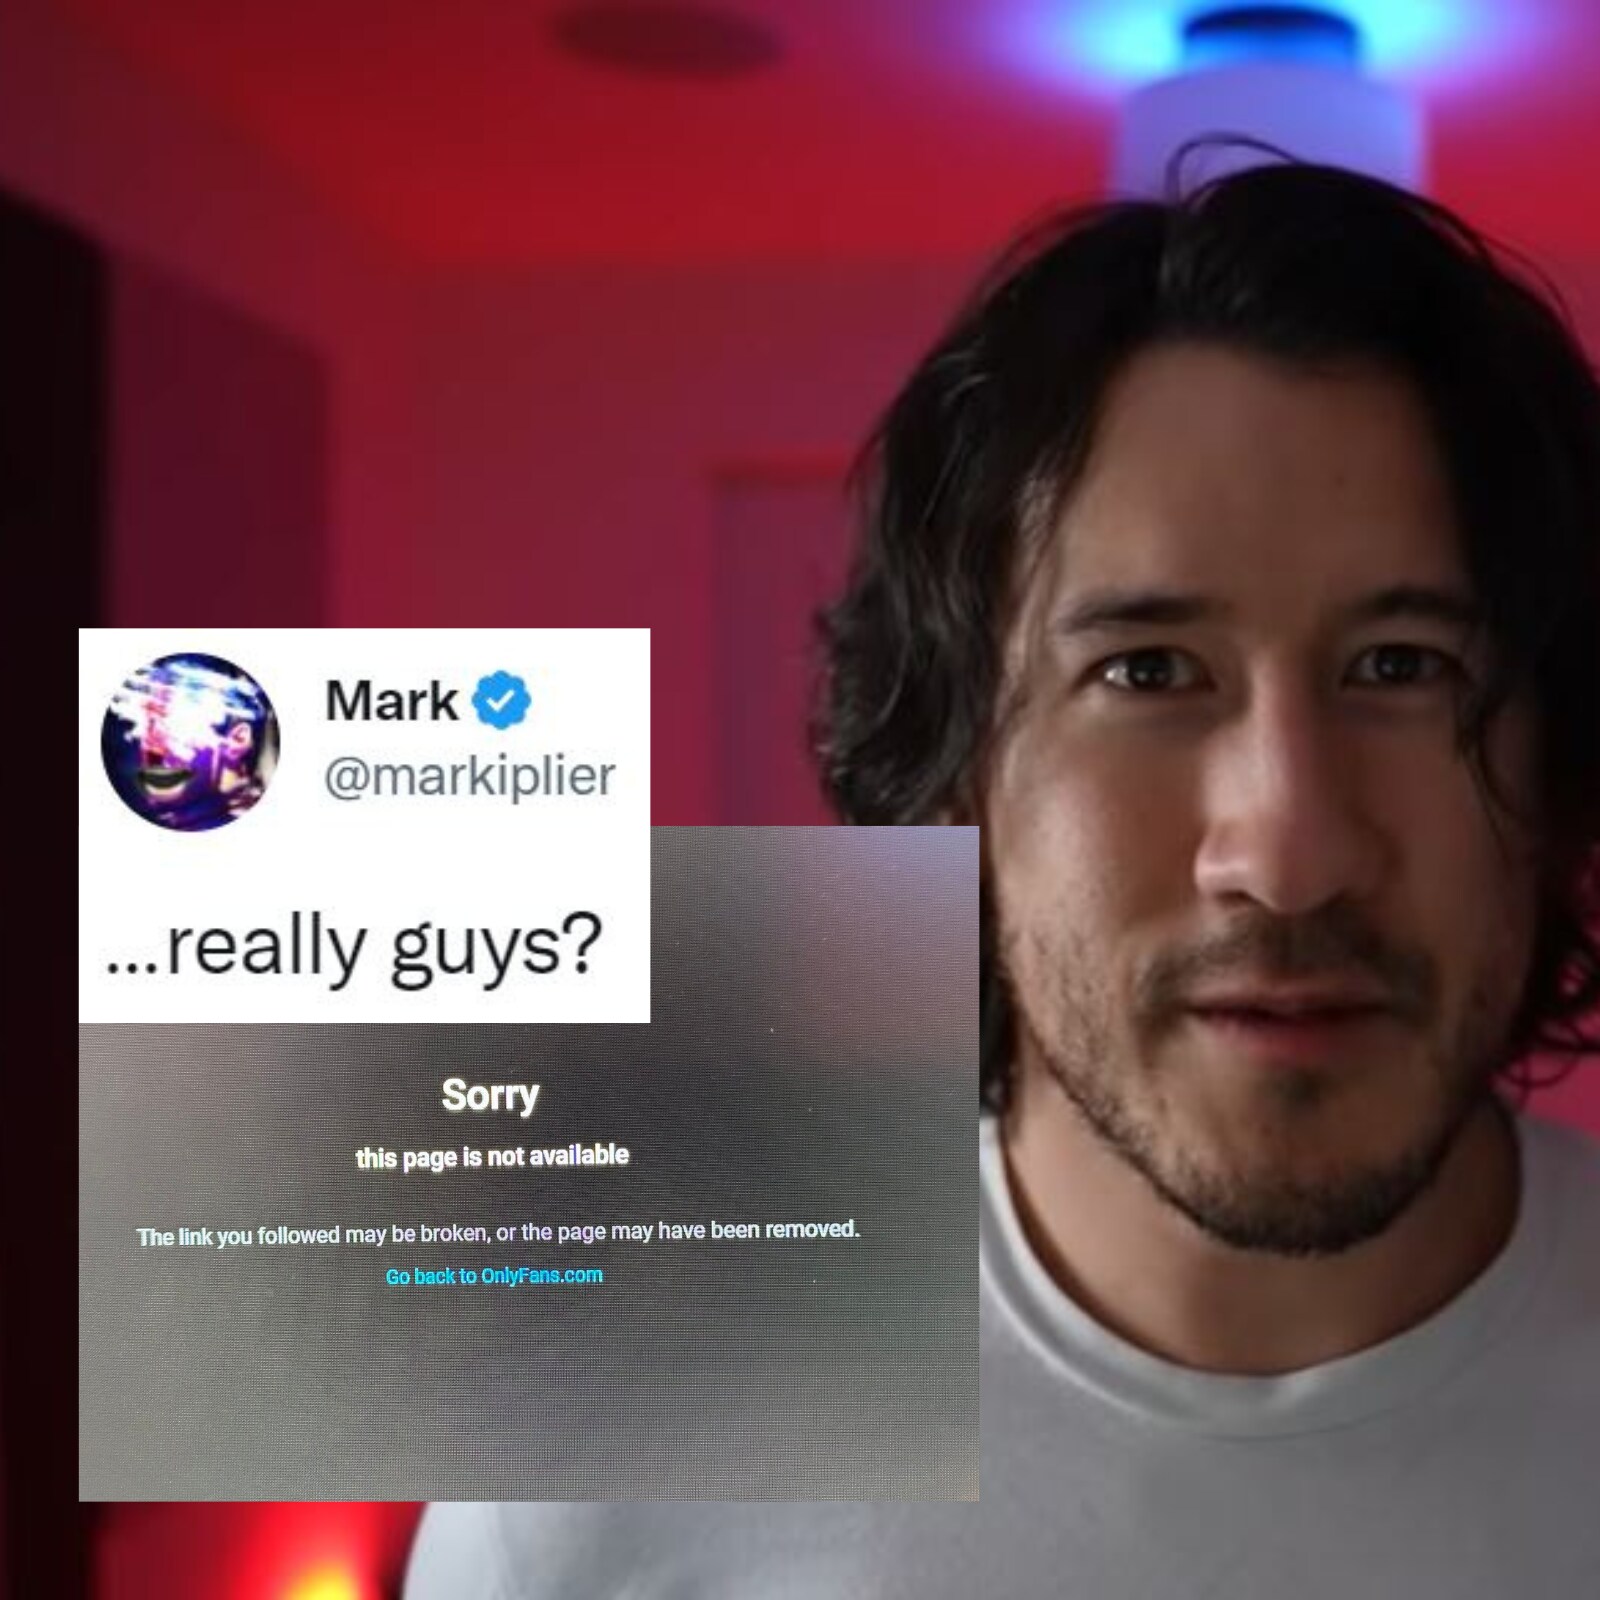 Does markiplier really have onlyfans